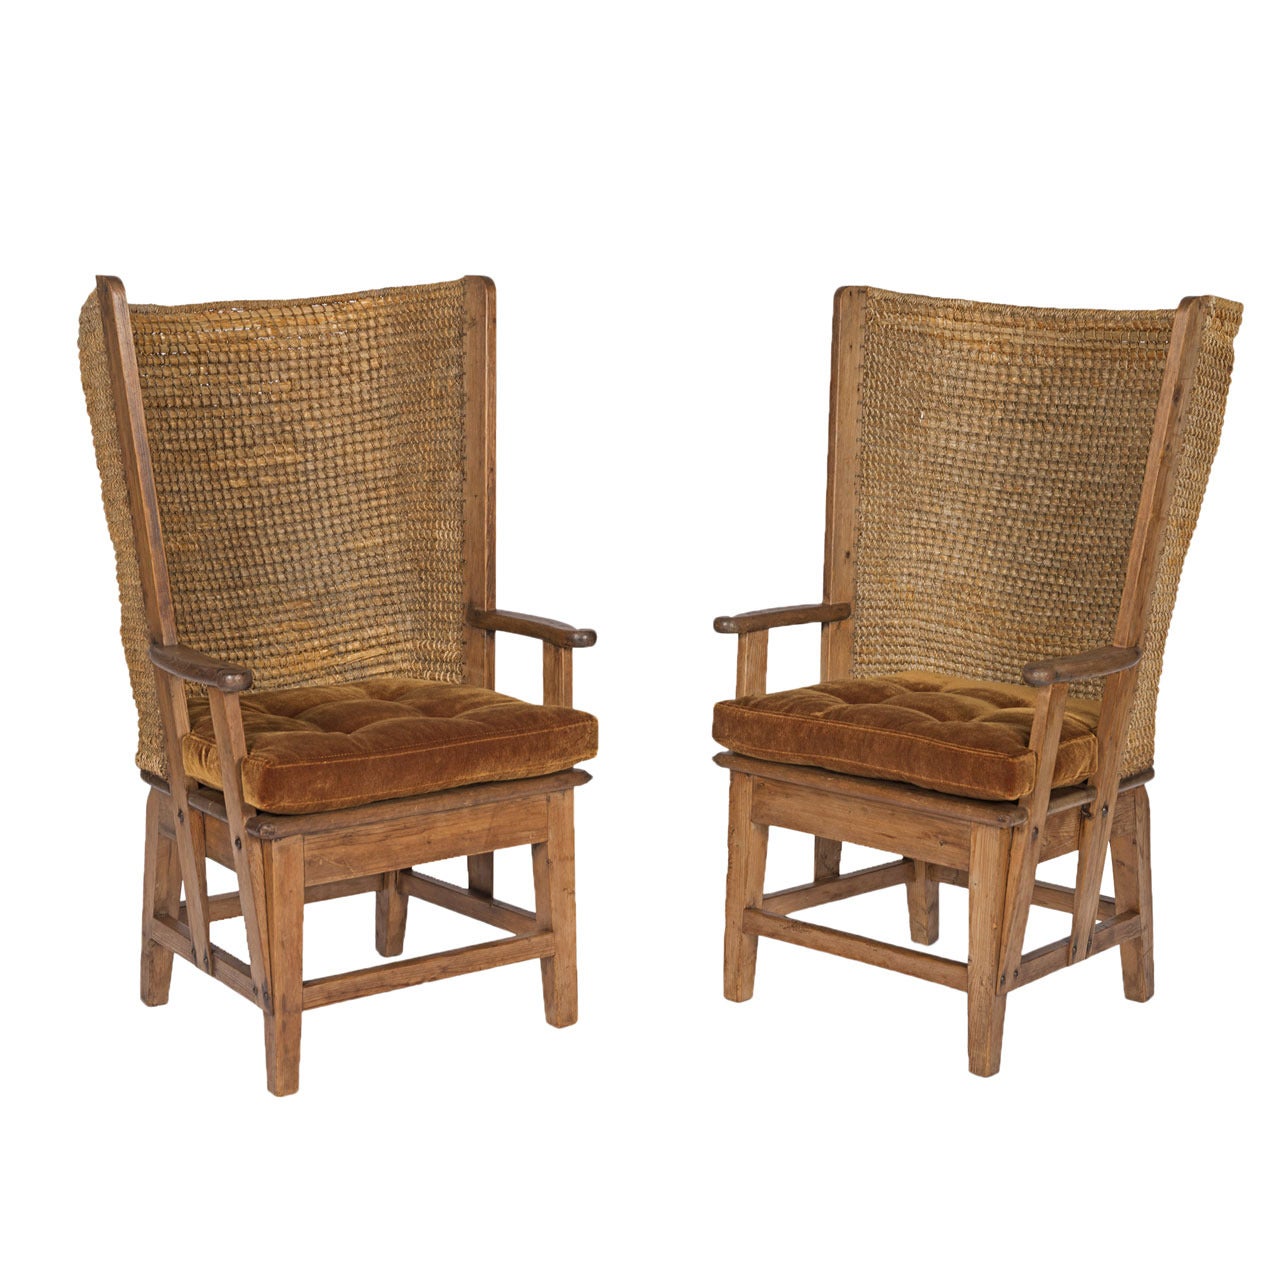 Pair of Orkney Chairs